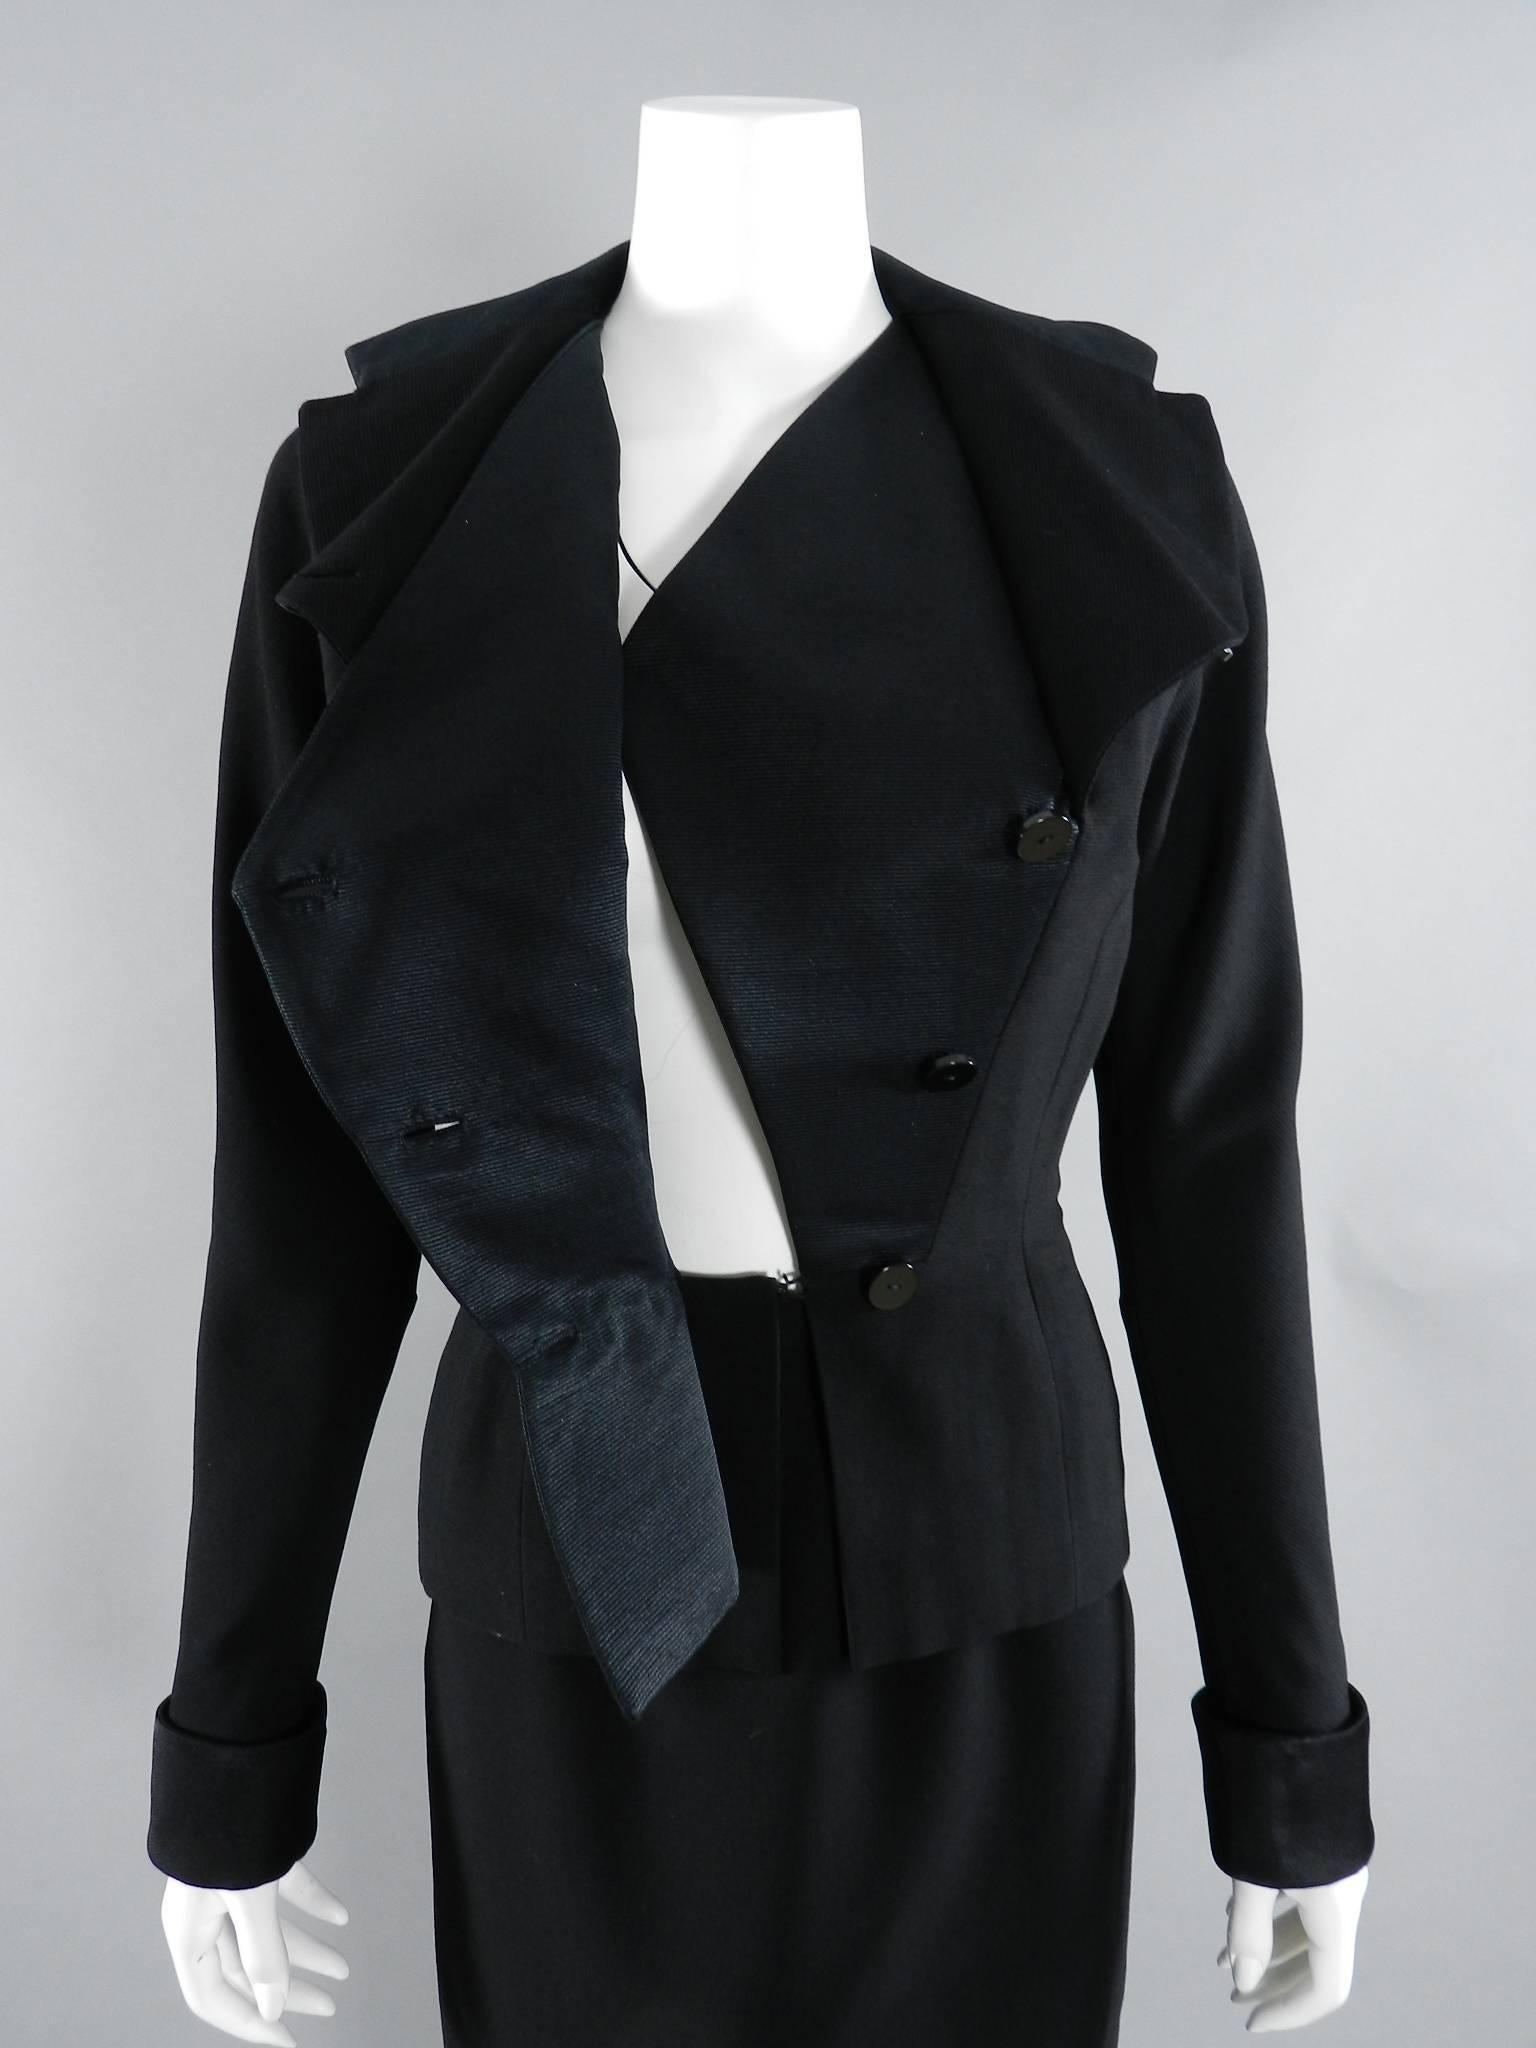 Pierre Balmain Black Silk Satin and Wool Skirt Suit, 1950s  For Sale 2